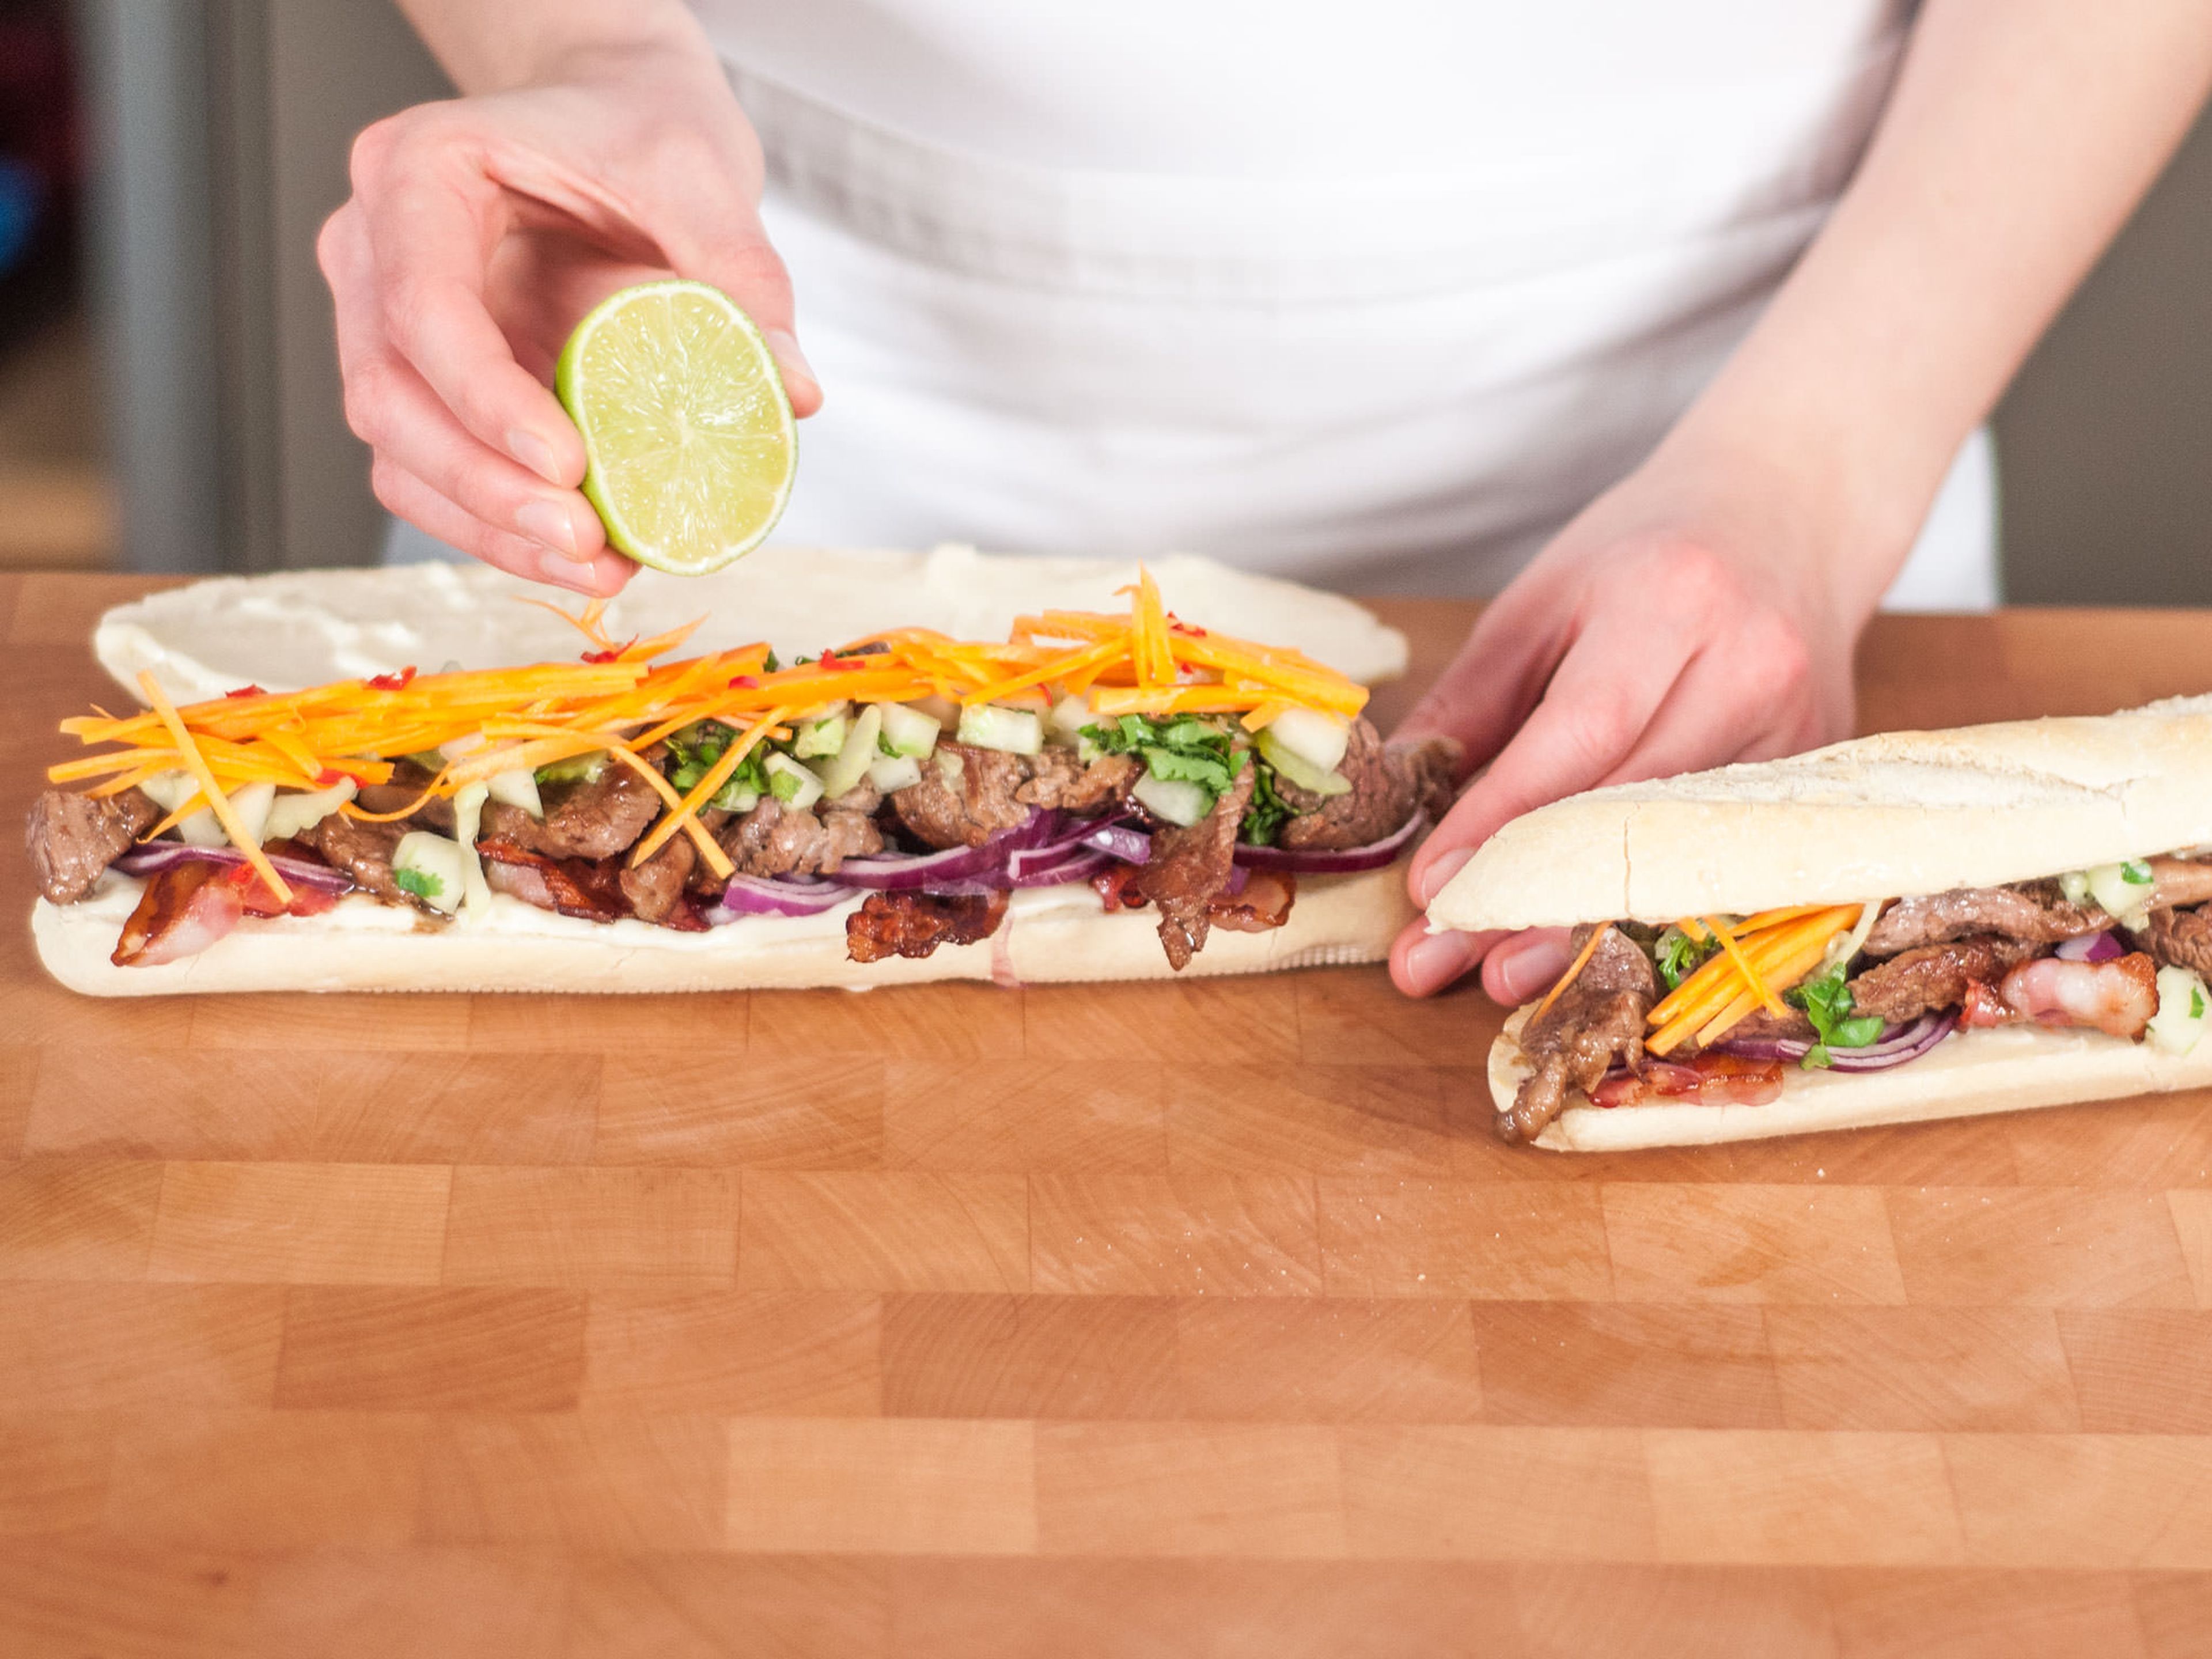 Cut baguette lengthwise, but not all the way through. Spread top and bottom layer of baguette with mayonnaise. Layer with bacon, beef, vegetables, and herbs. Garnish with remainder of chopped cilantro and top it off with a drizzle of lime juice. Enjoy!